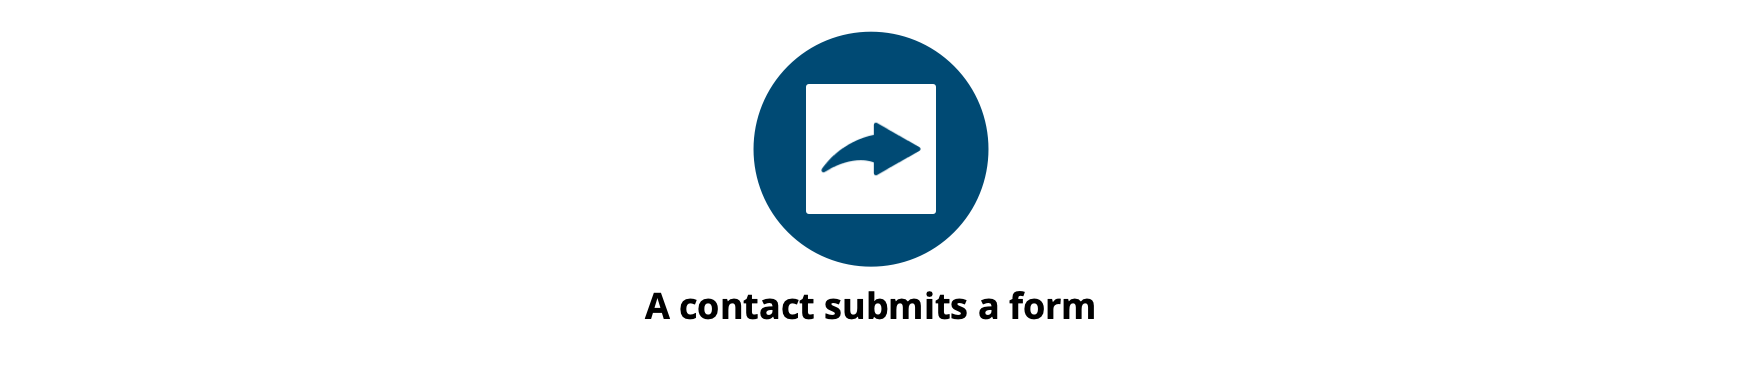 A_contact_submits_a_form.png